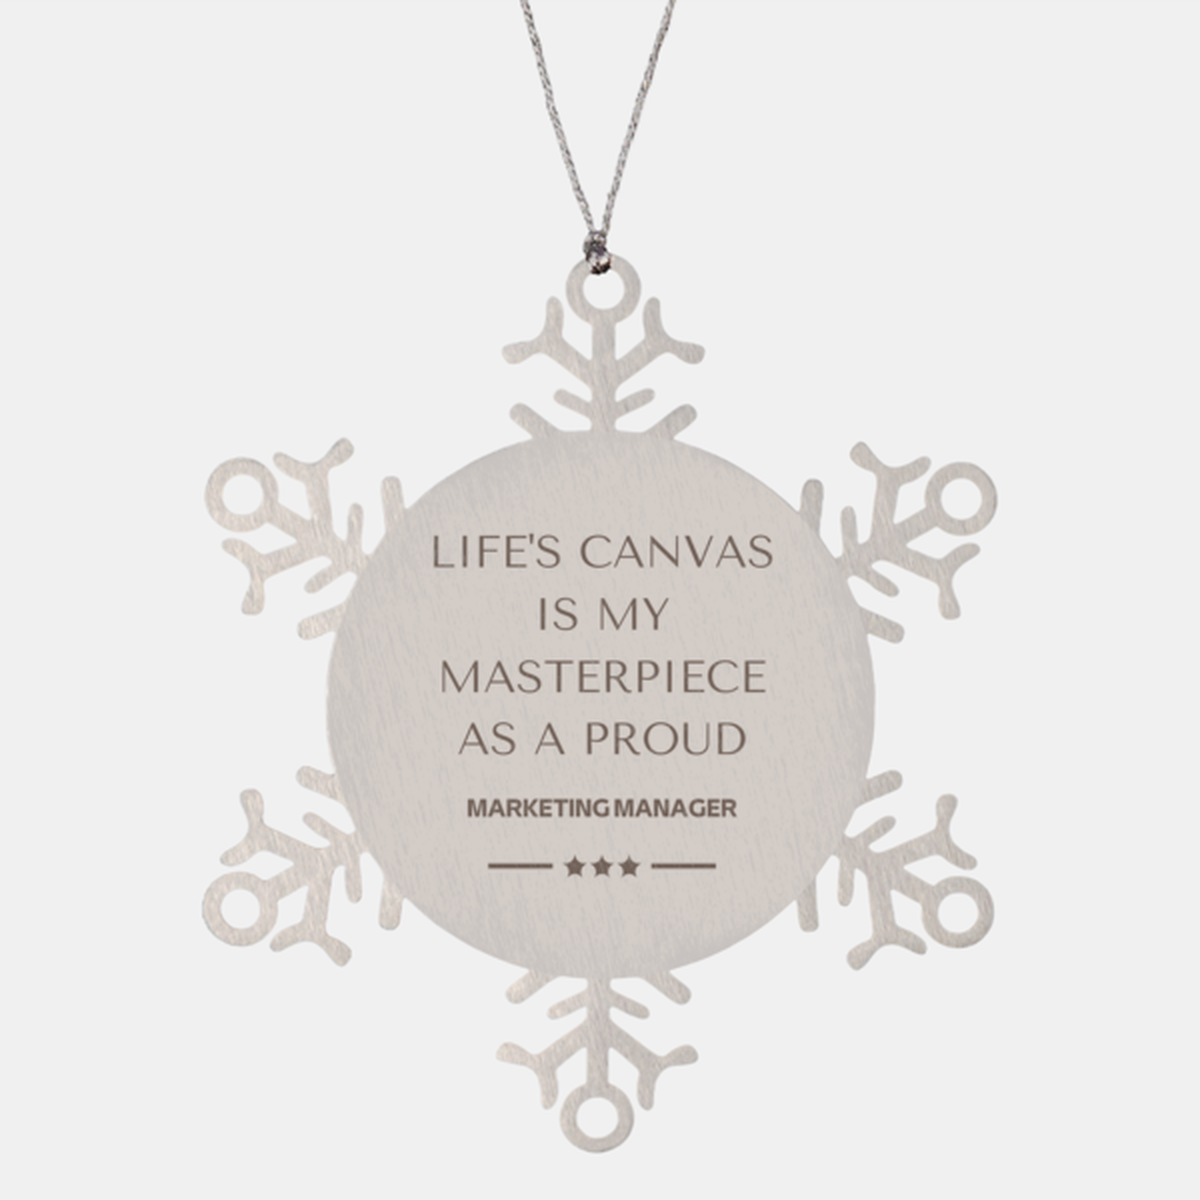 Proud Marketing Manager Gifts, Life's canvas is my masterpiece, Epic Birthday Christmas Unique Snowflake Ornament For Marketing Manager, Coworkers, Men, Women, Friends